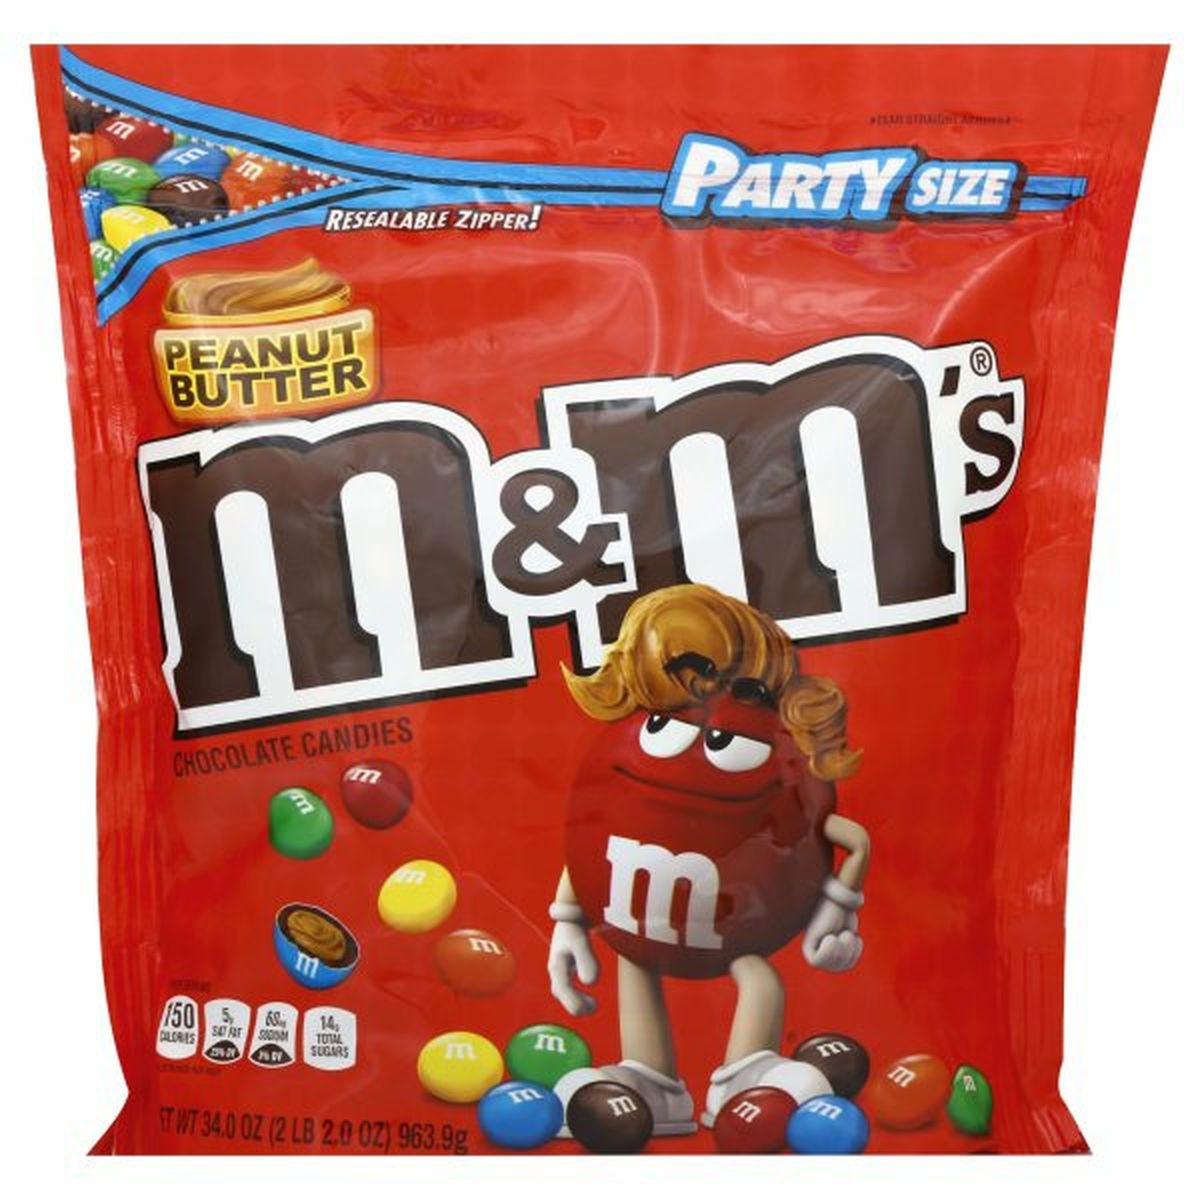 Calories in M&M's Chocolate Candies, Peanut Butter, Party Size